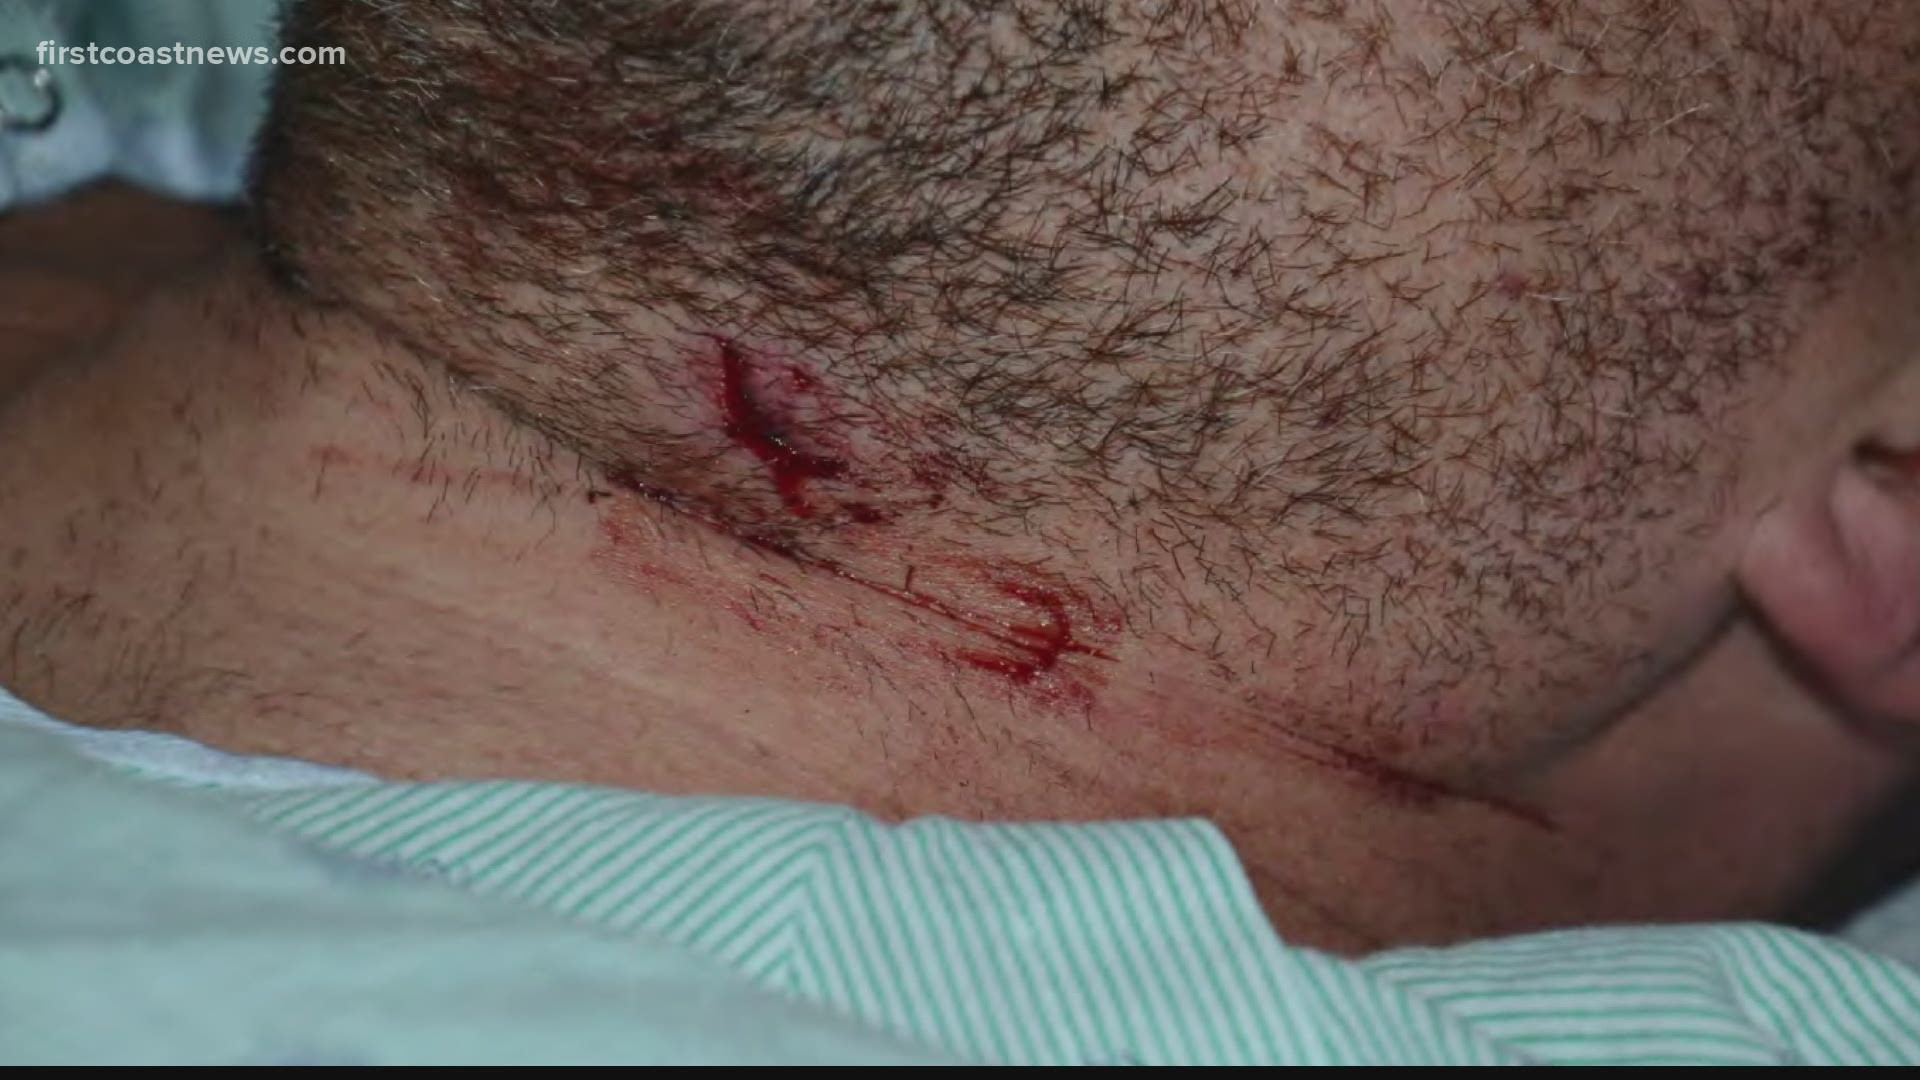 Photographs show the injuries sustained by the officer who survived thanks to his body armor.